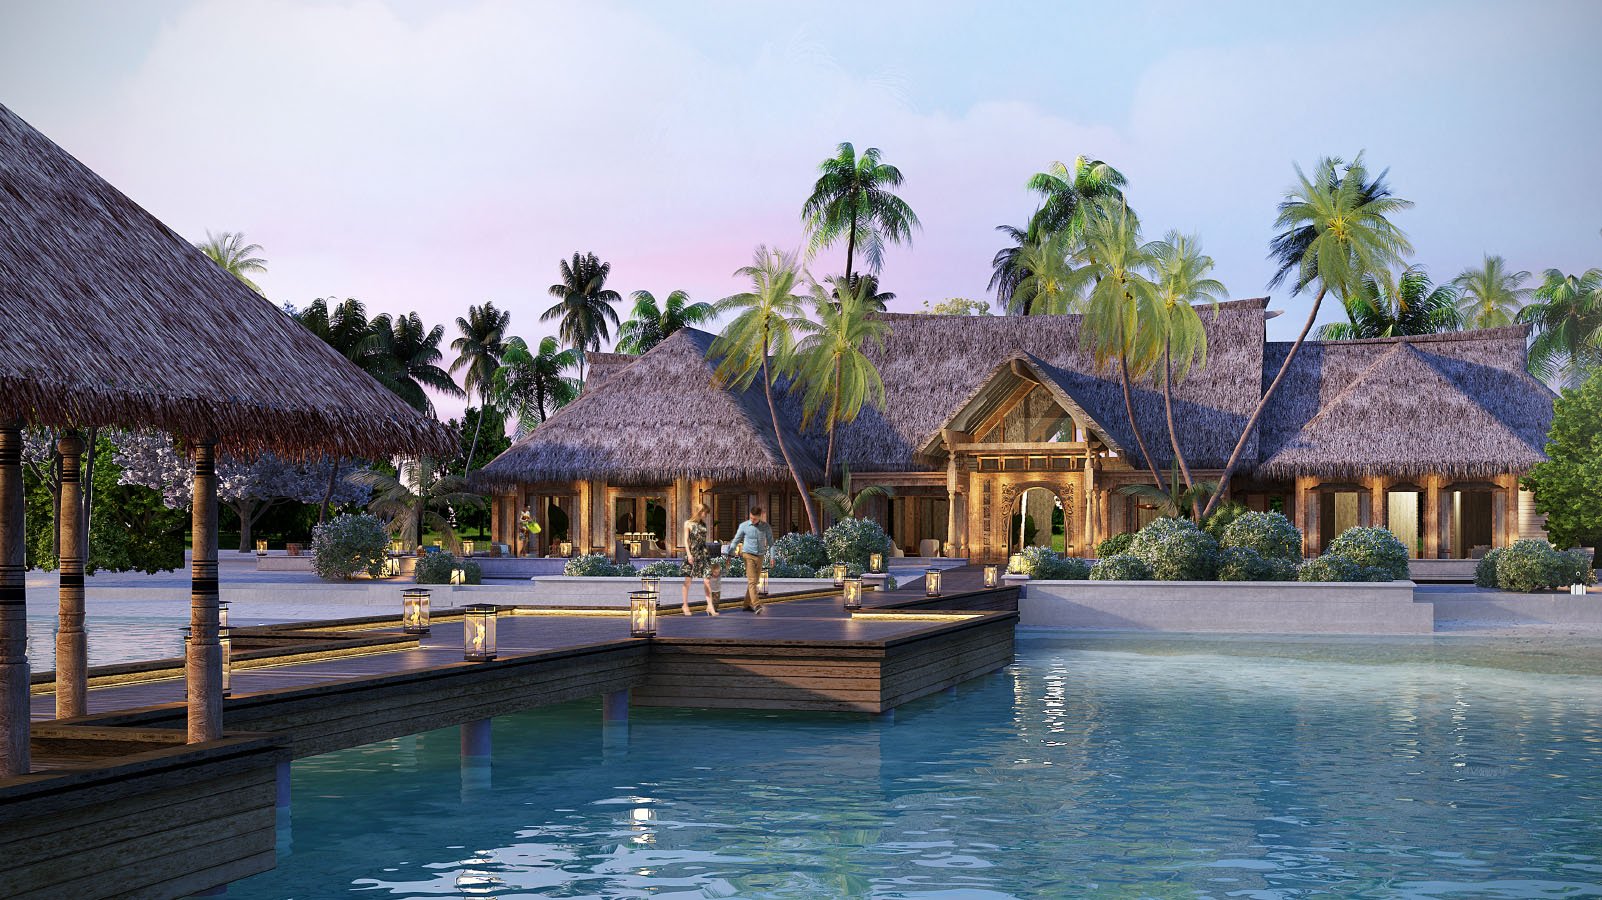 Hilton has signed its second hotel in the Maldives under the Waldorf Astoria brand in the exclusive South Male Atoll 